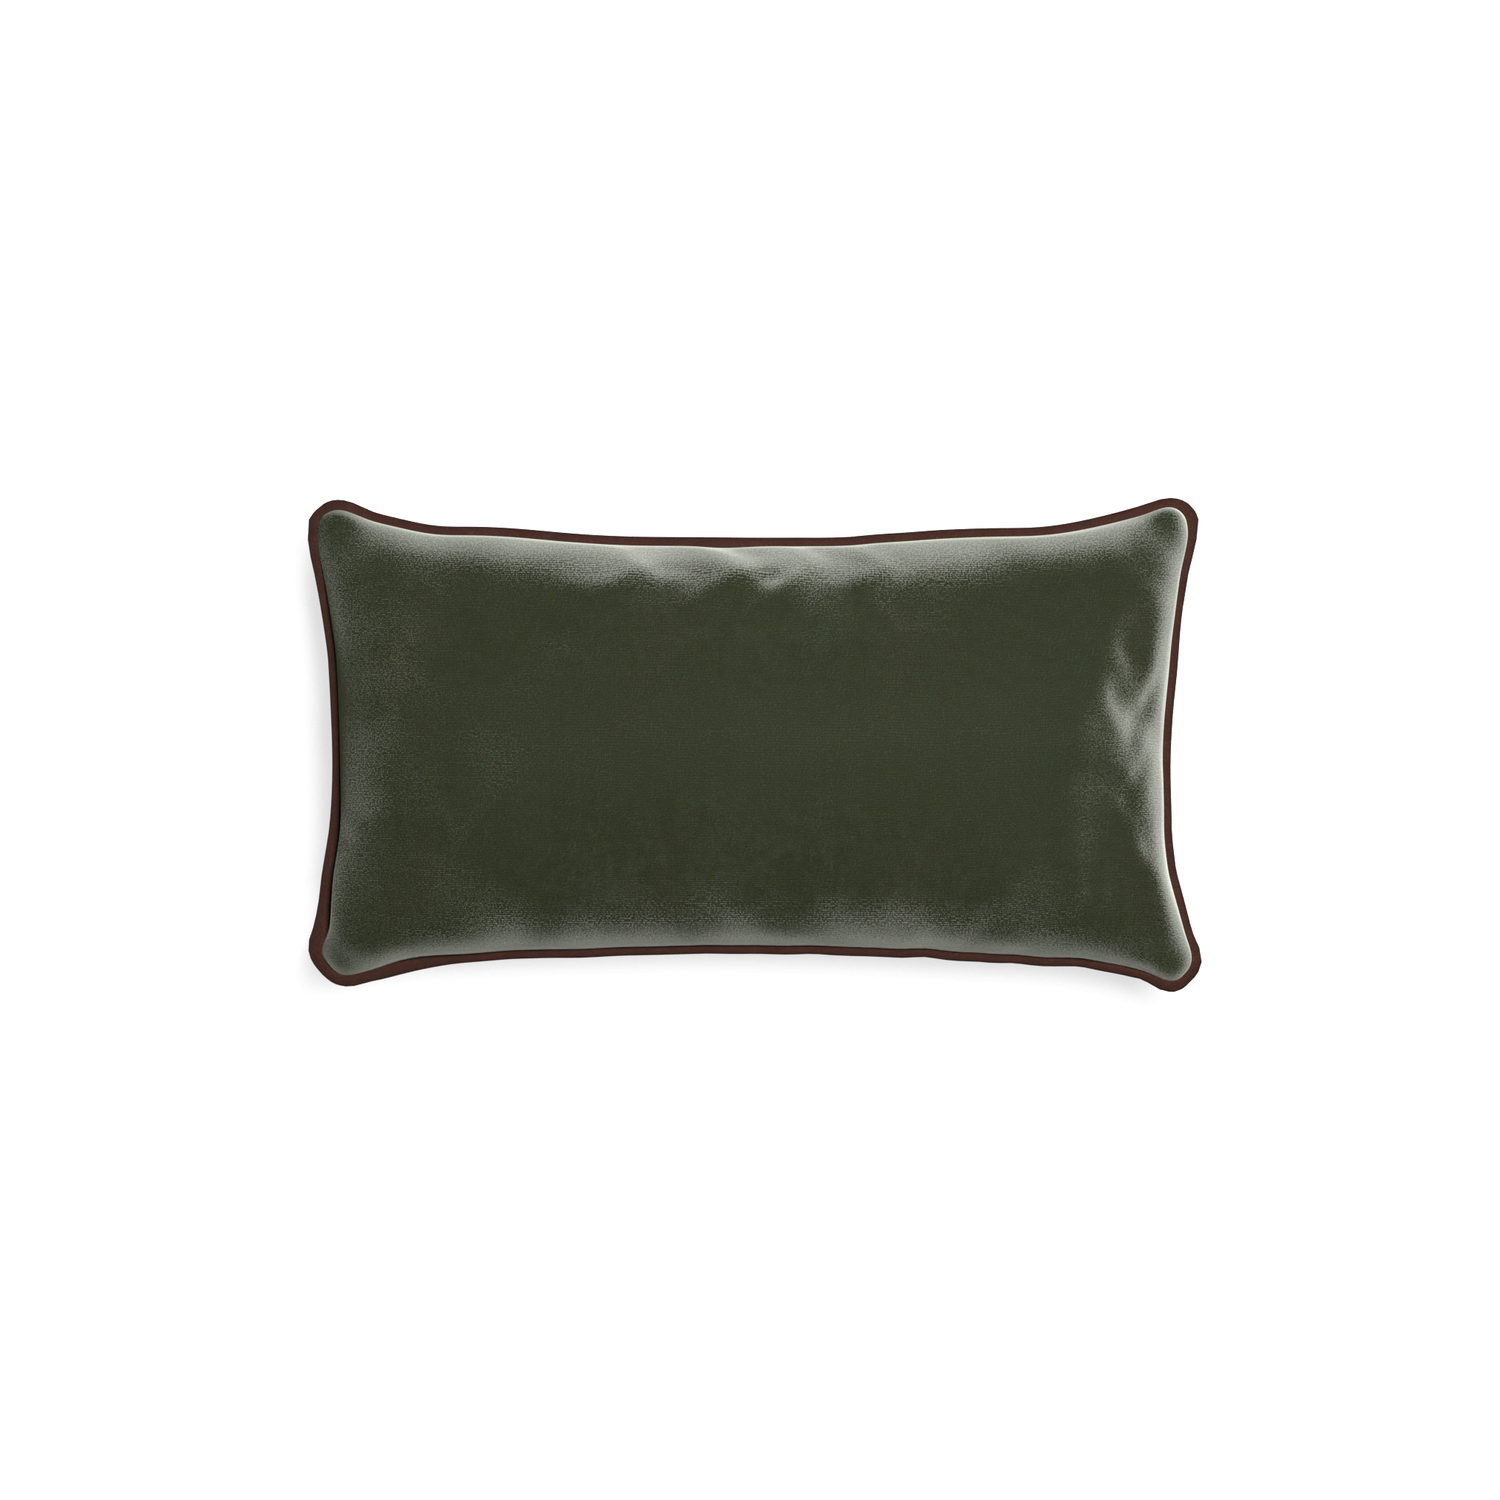 rectangle fern green velvet pillow with brown piping